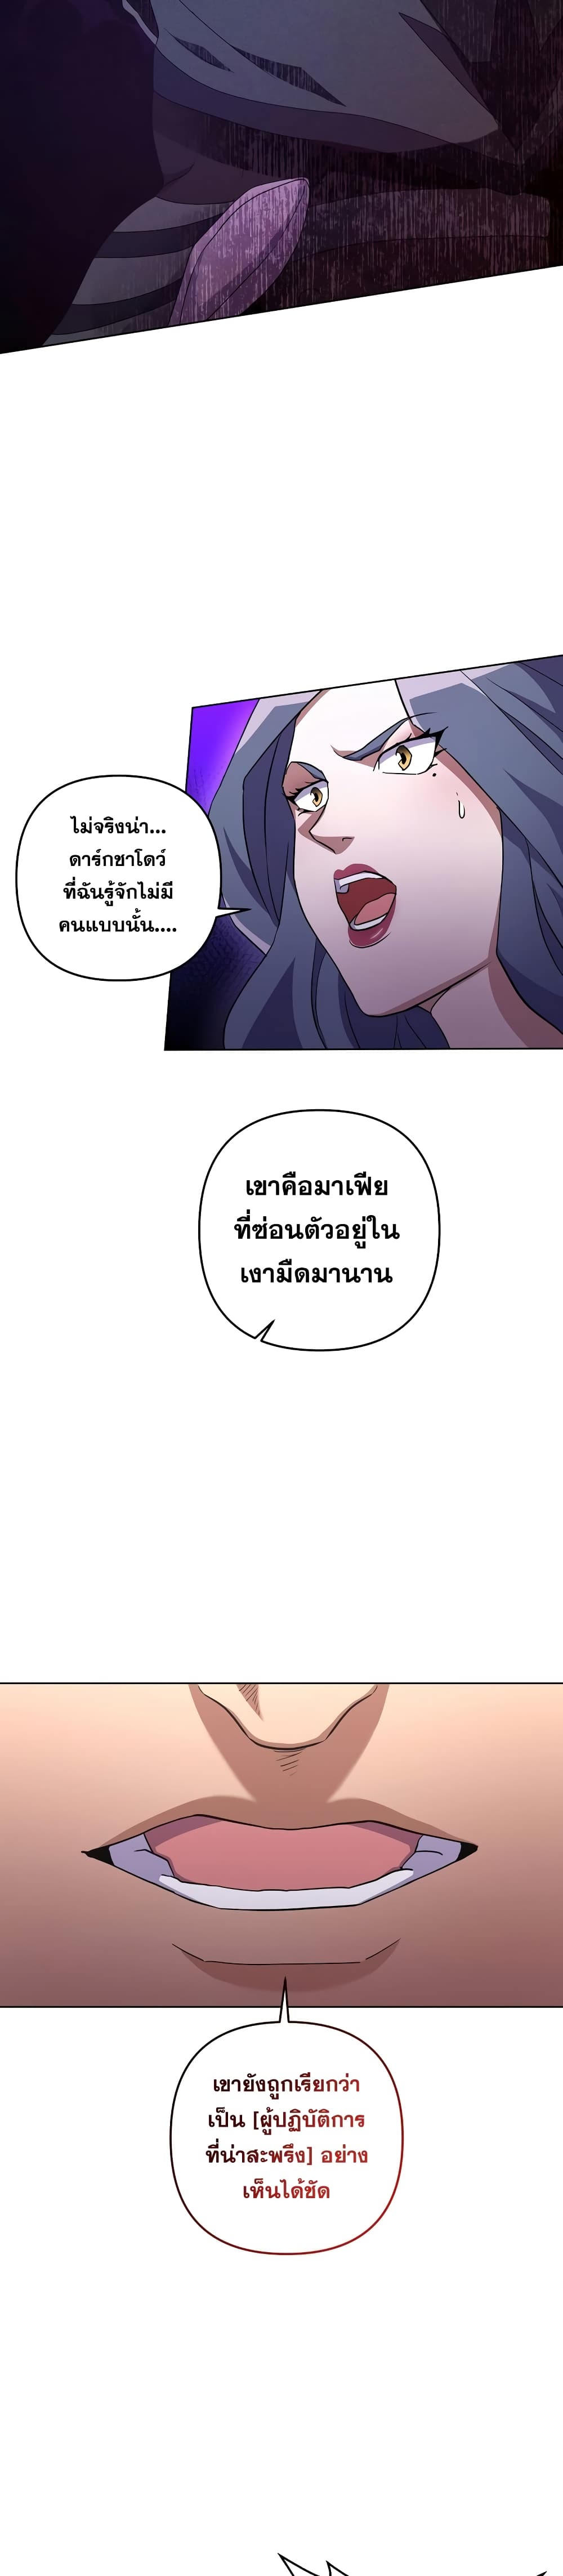 Surviving in an Action Manhwa 25 (12)